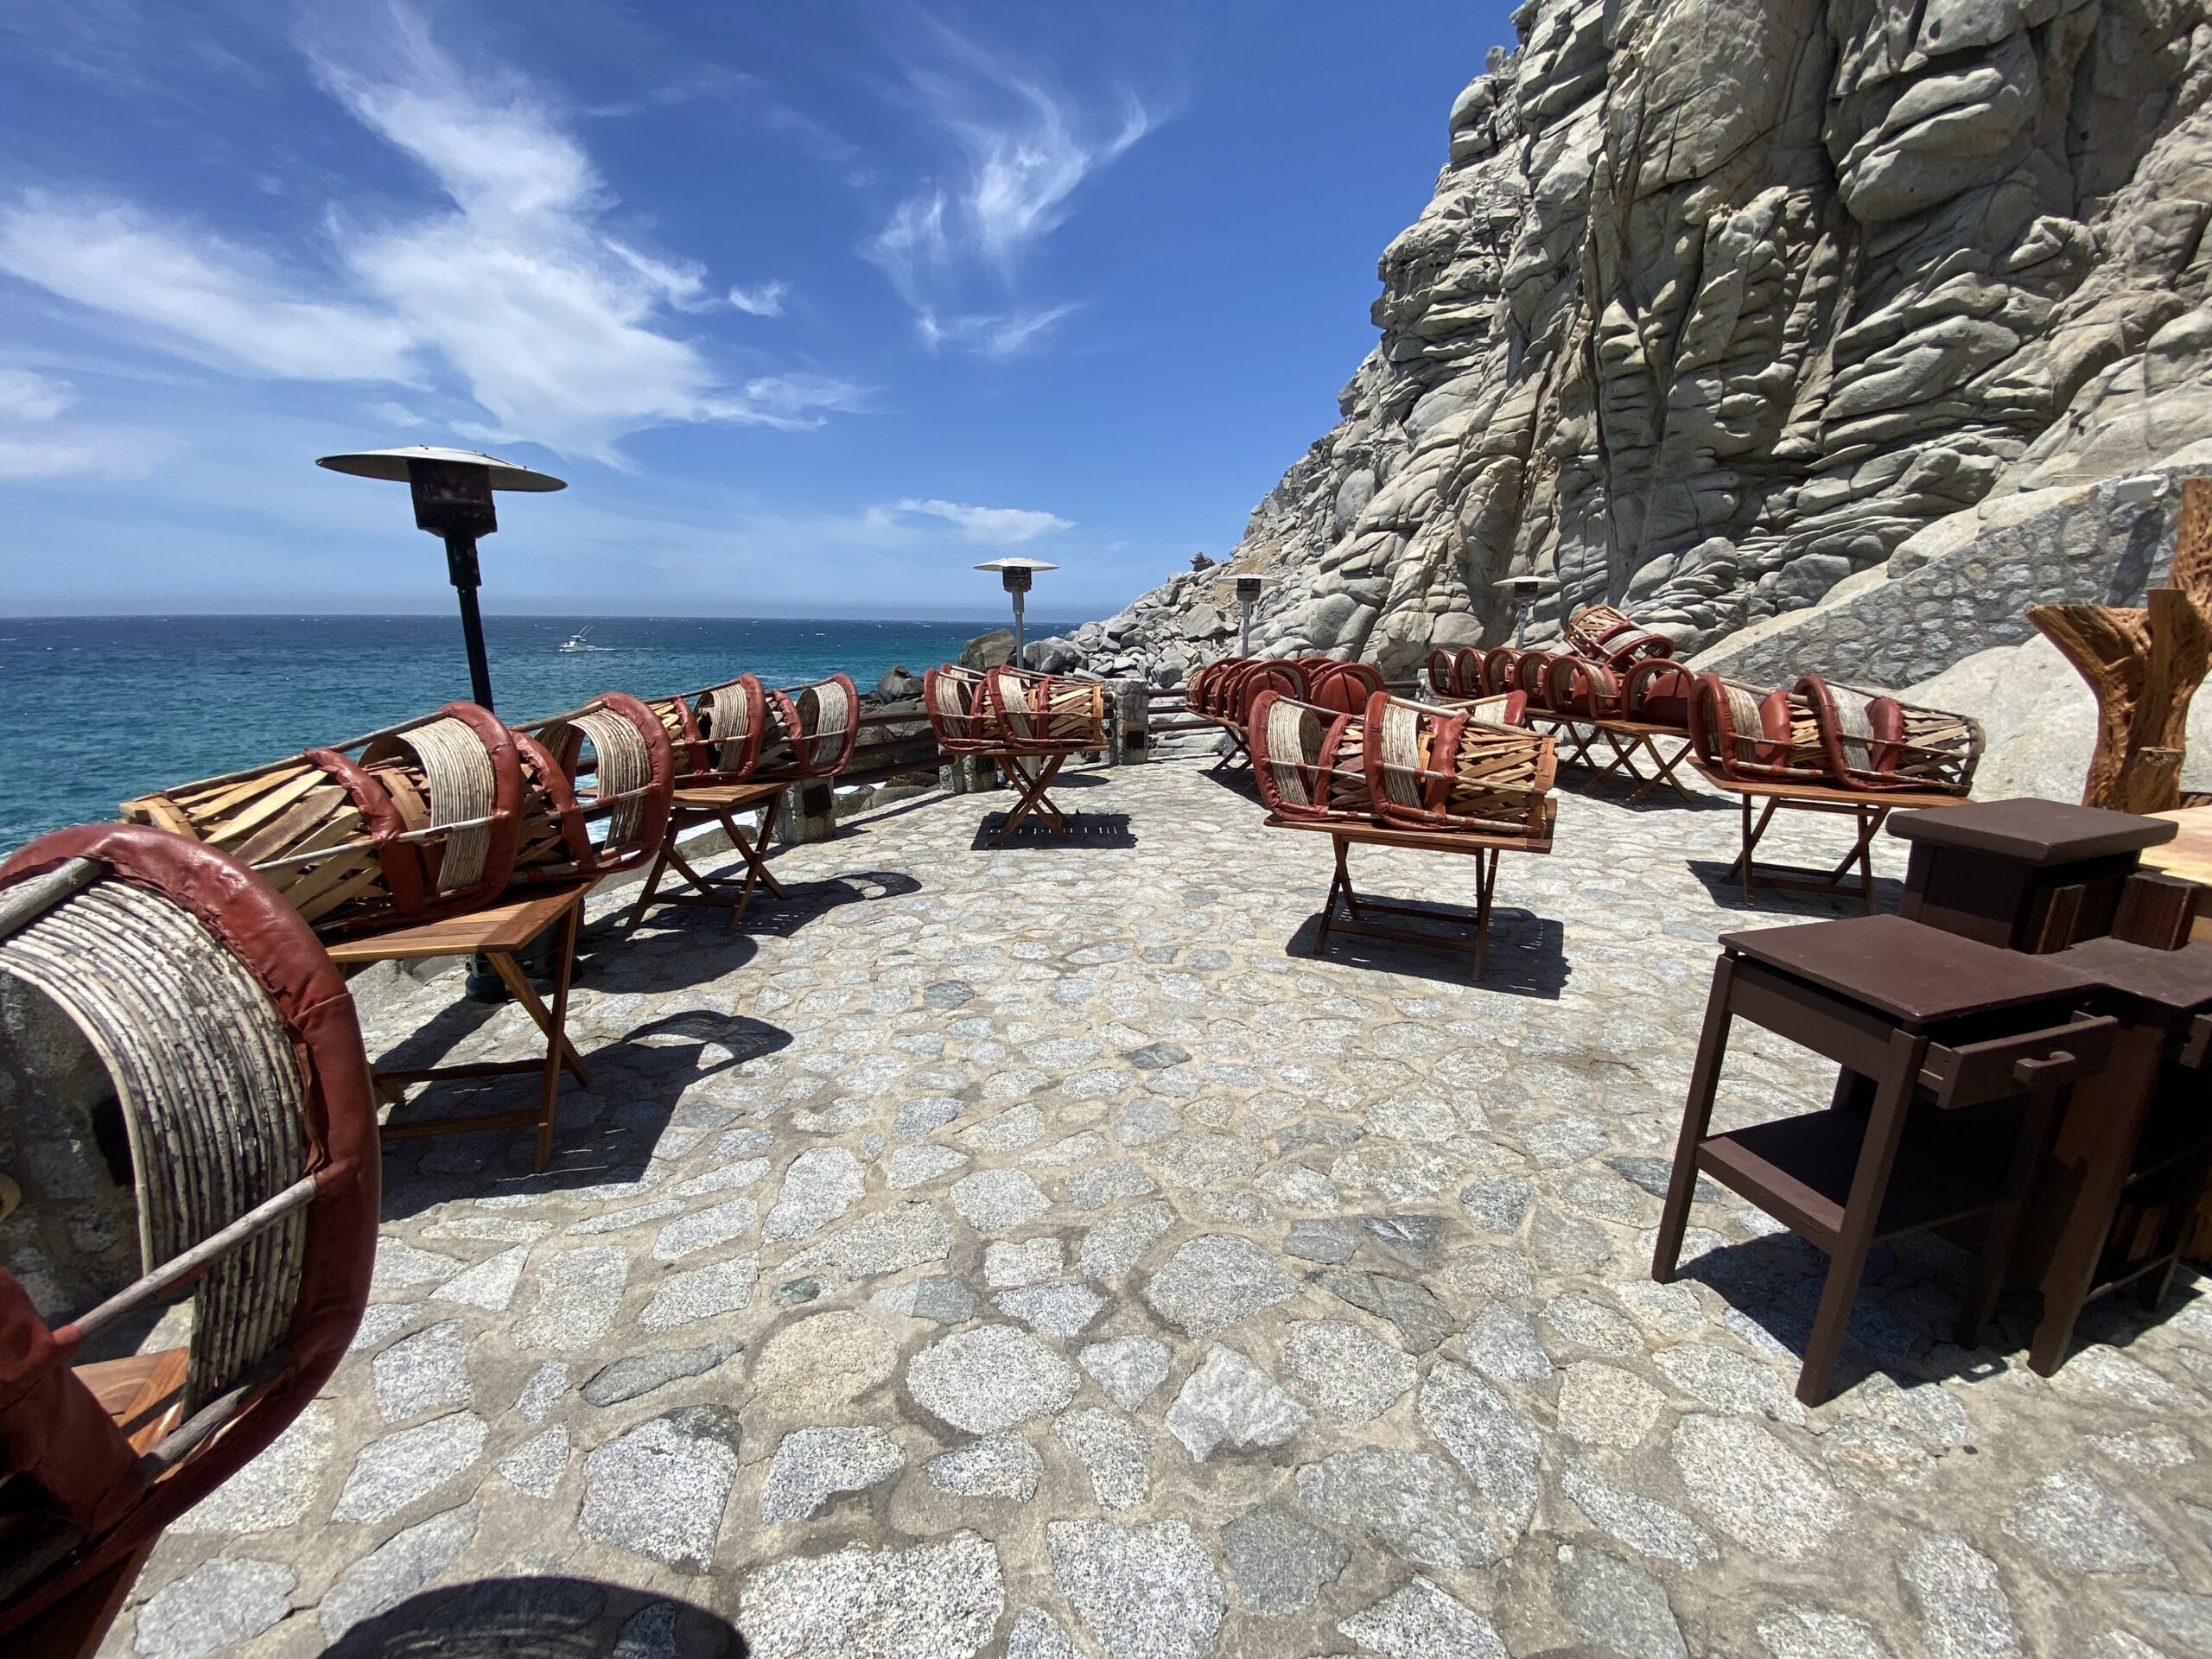 chairs on a stone patio with a cliff and water in the background